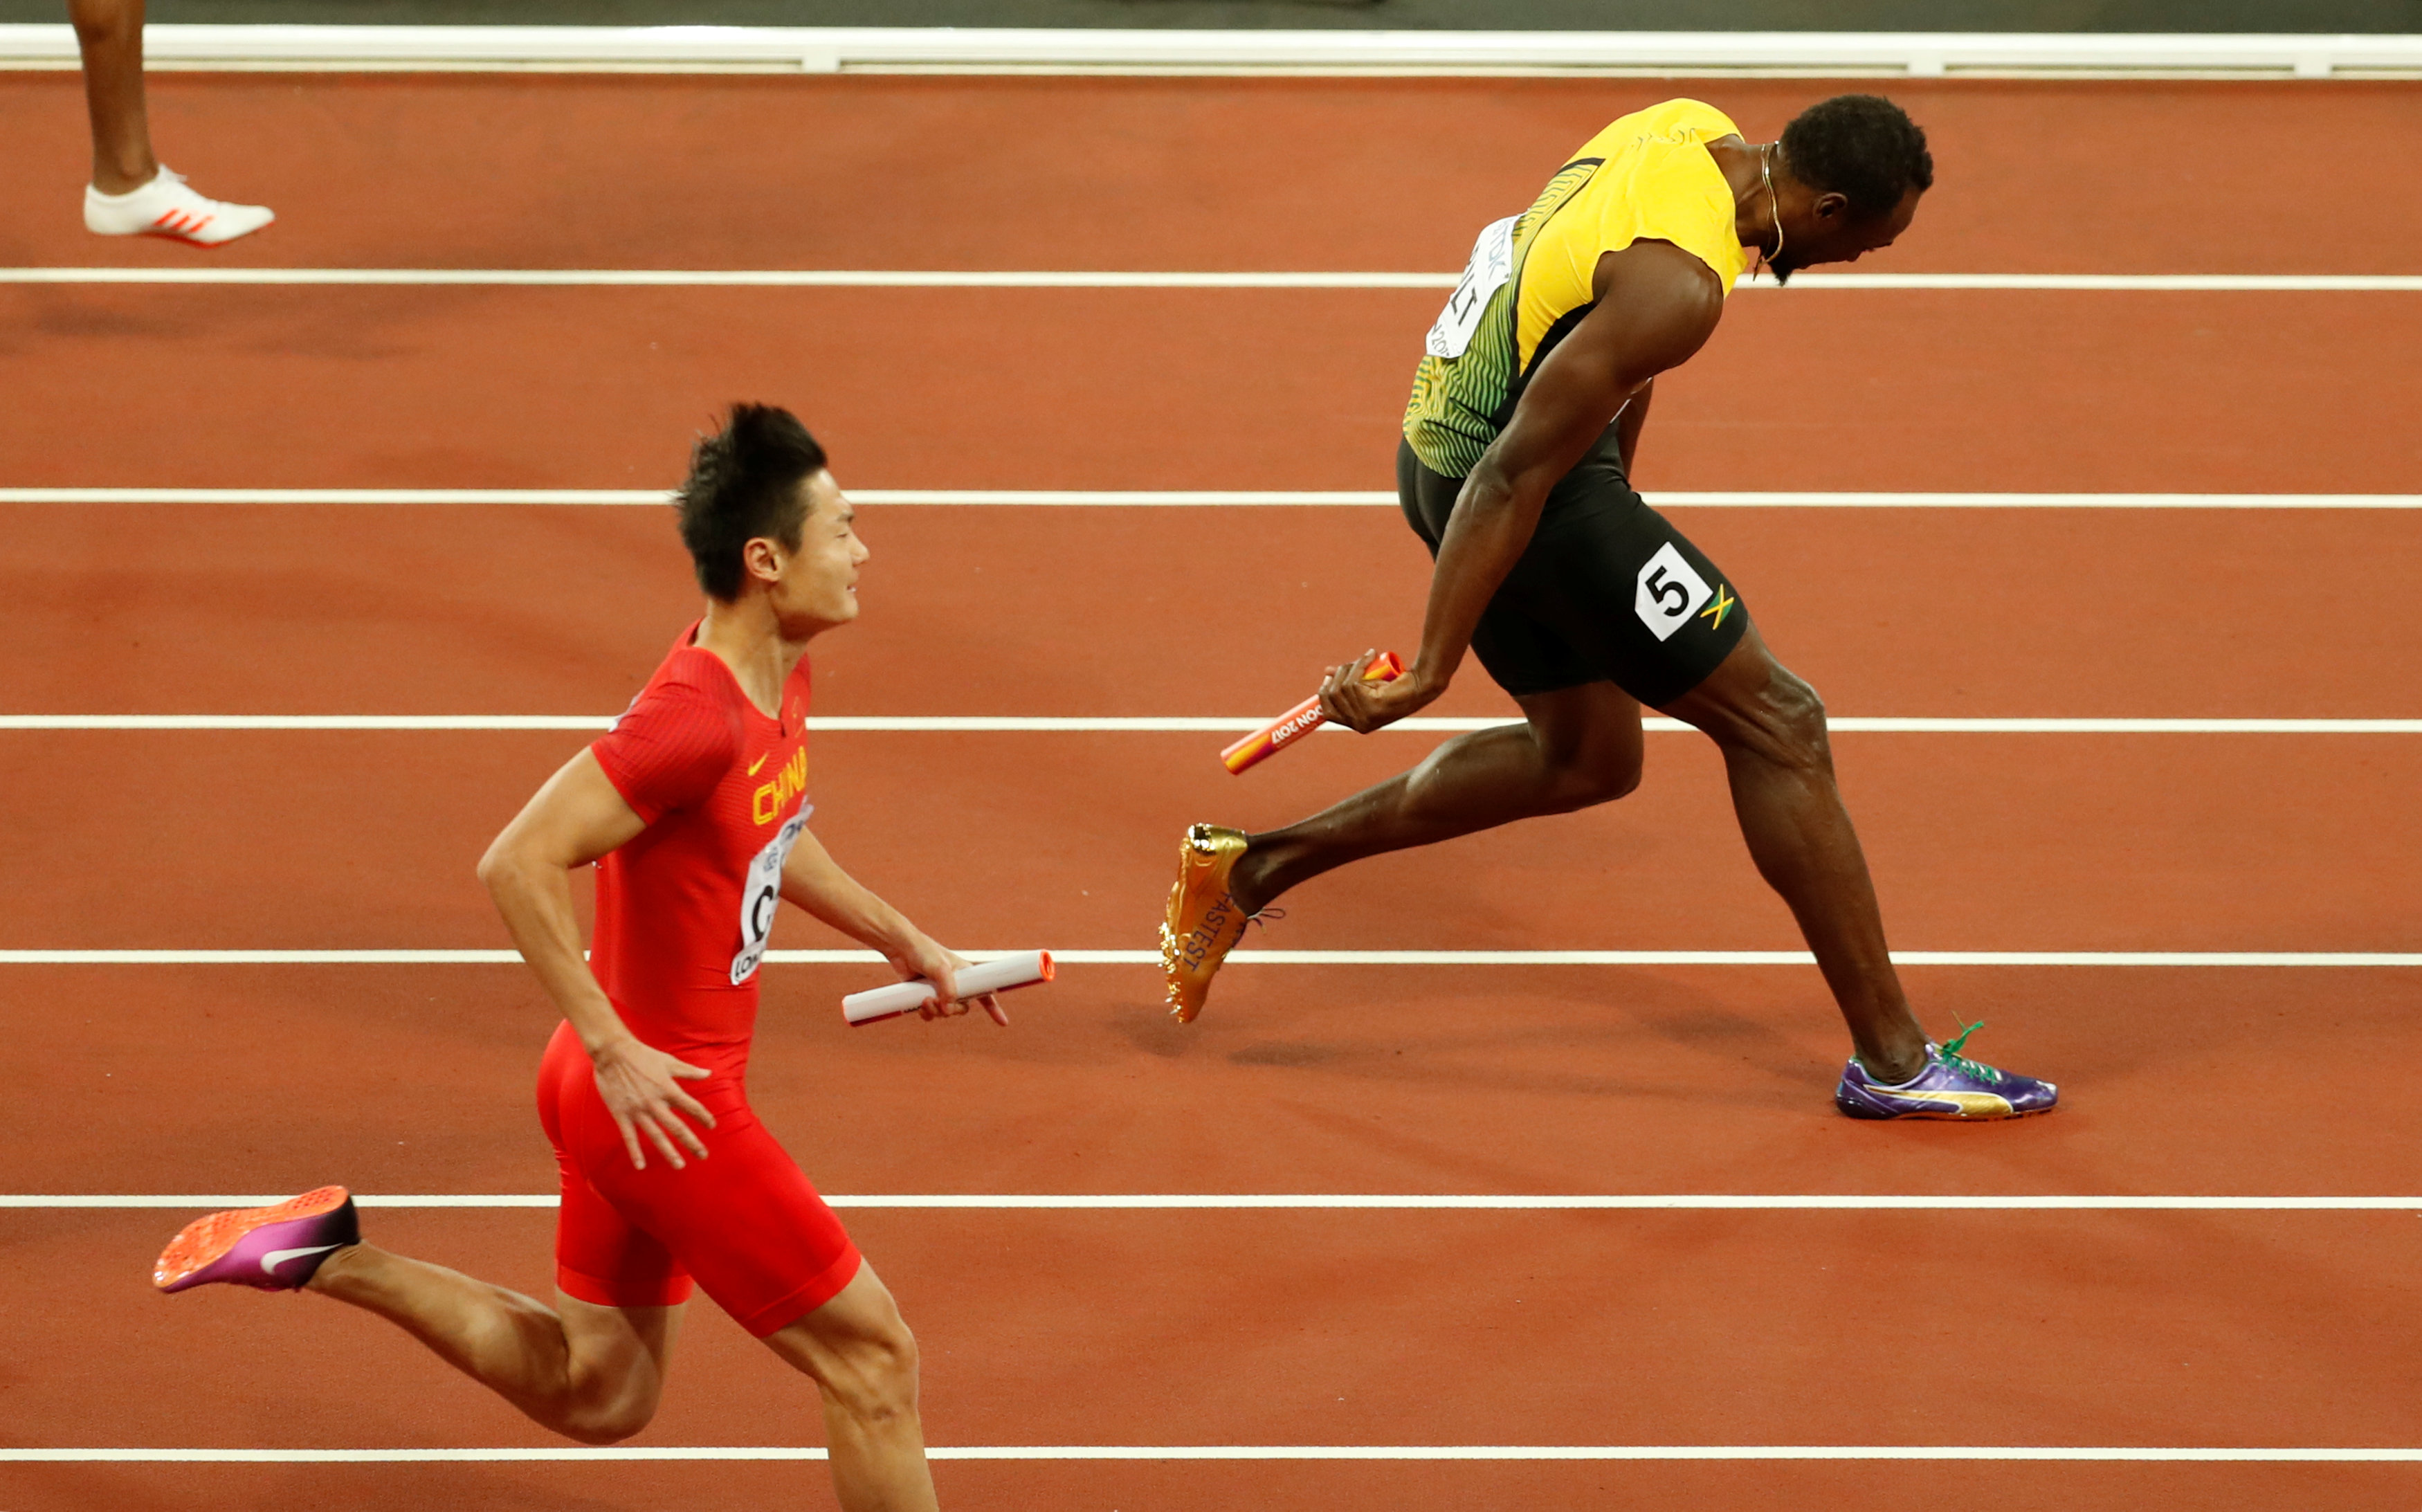 In pictures: Usain Leo Bolt suffers cramps